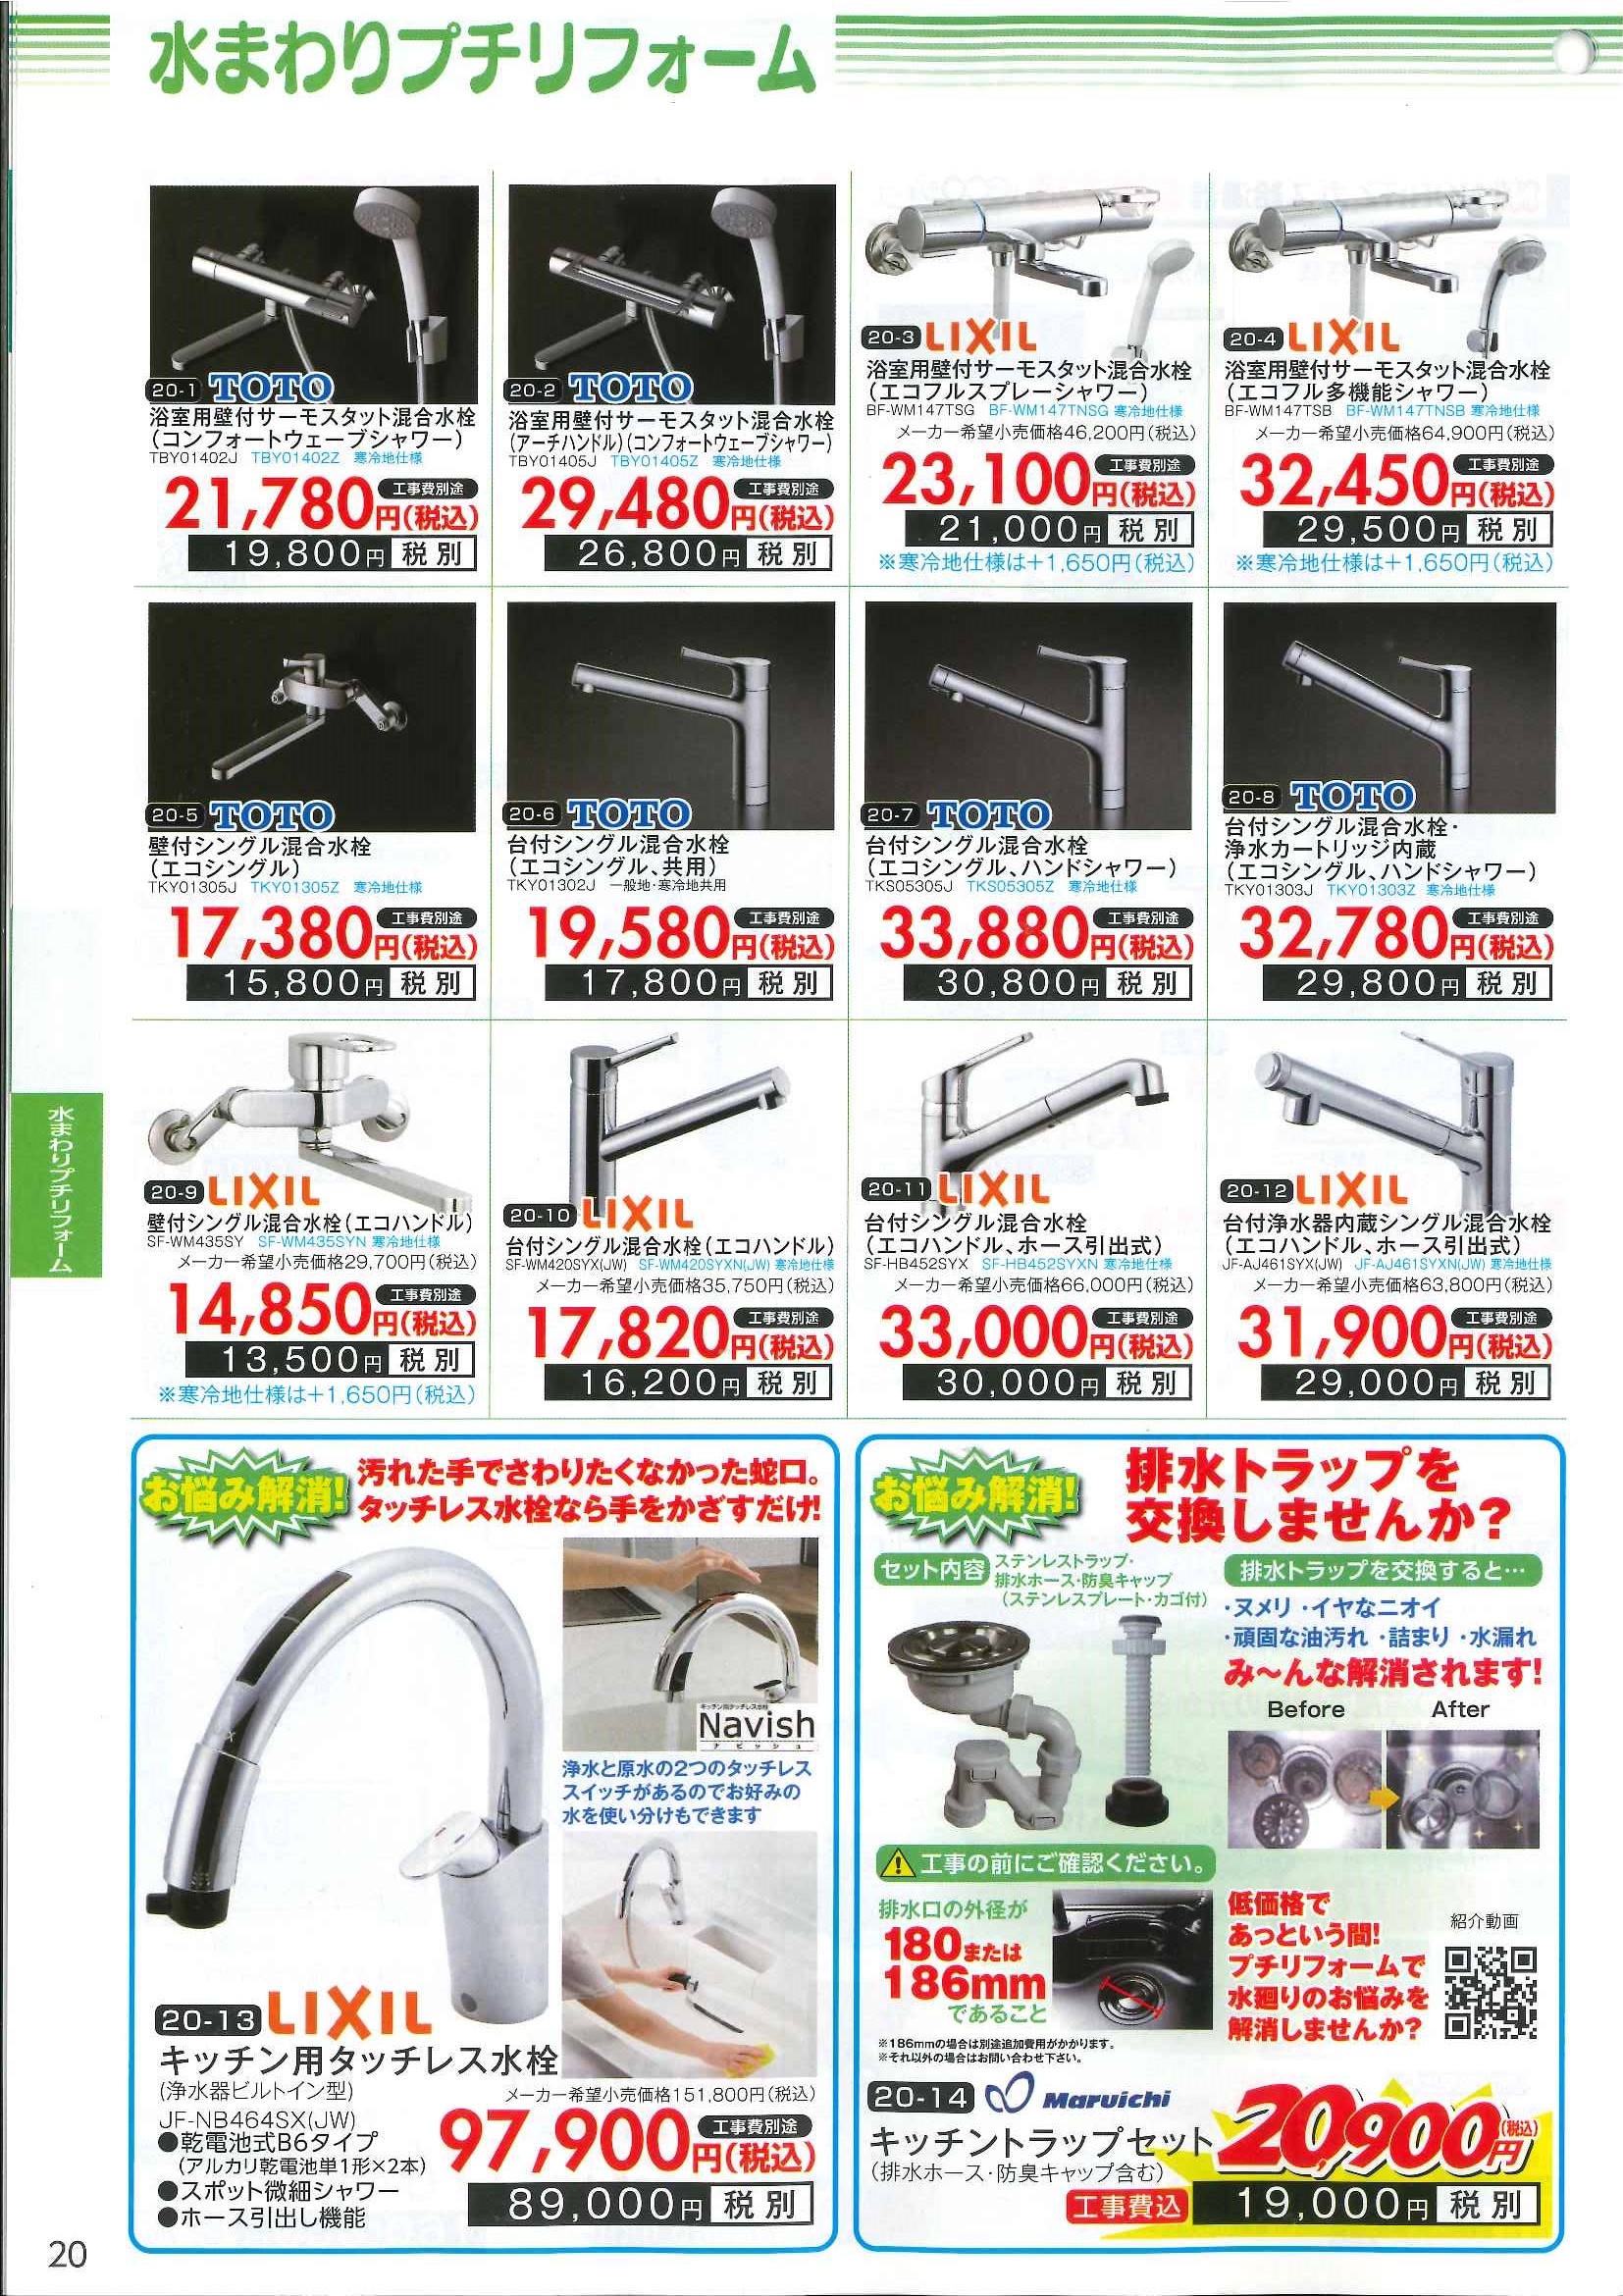 Rohl Perrin ＆ Rowe English Bronze Shower Package 並行輸入品 通販 